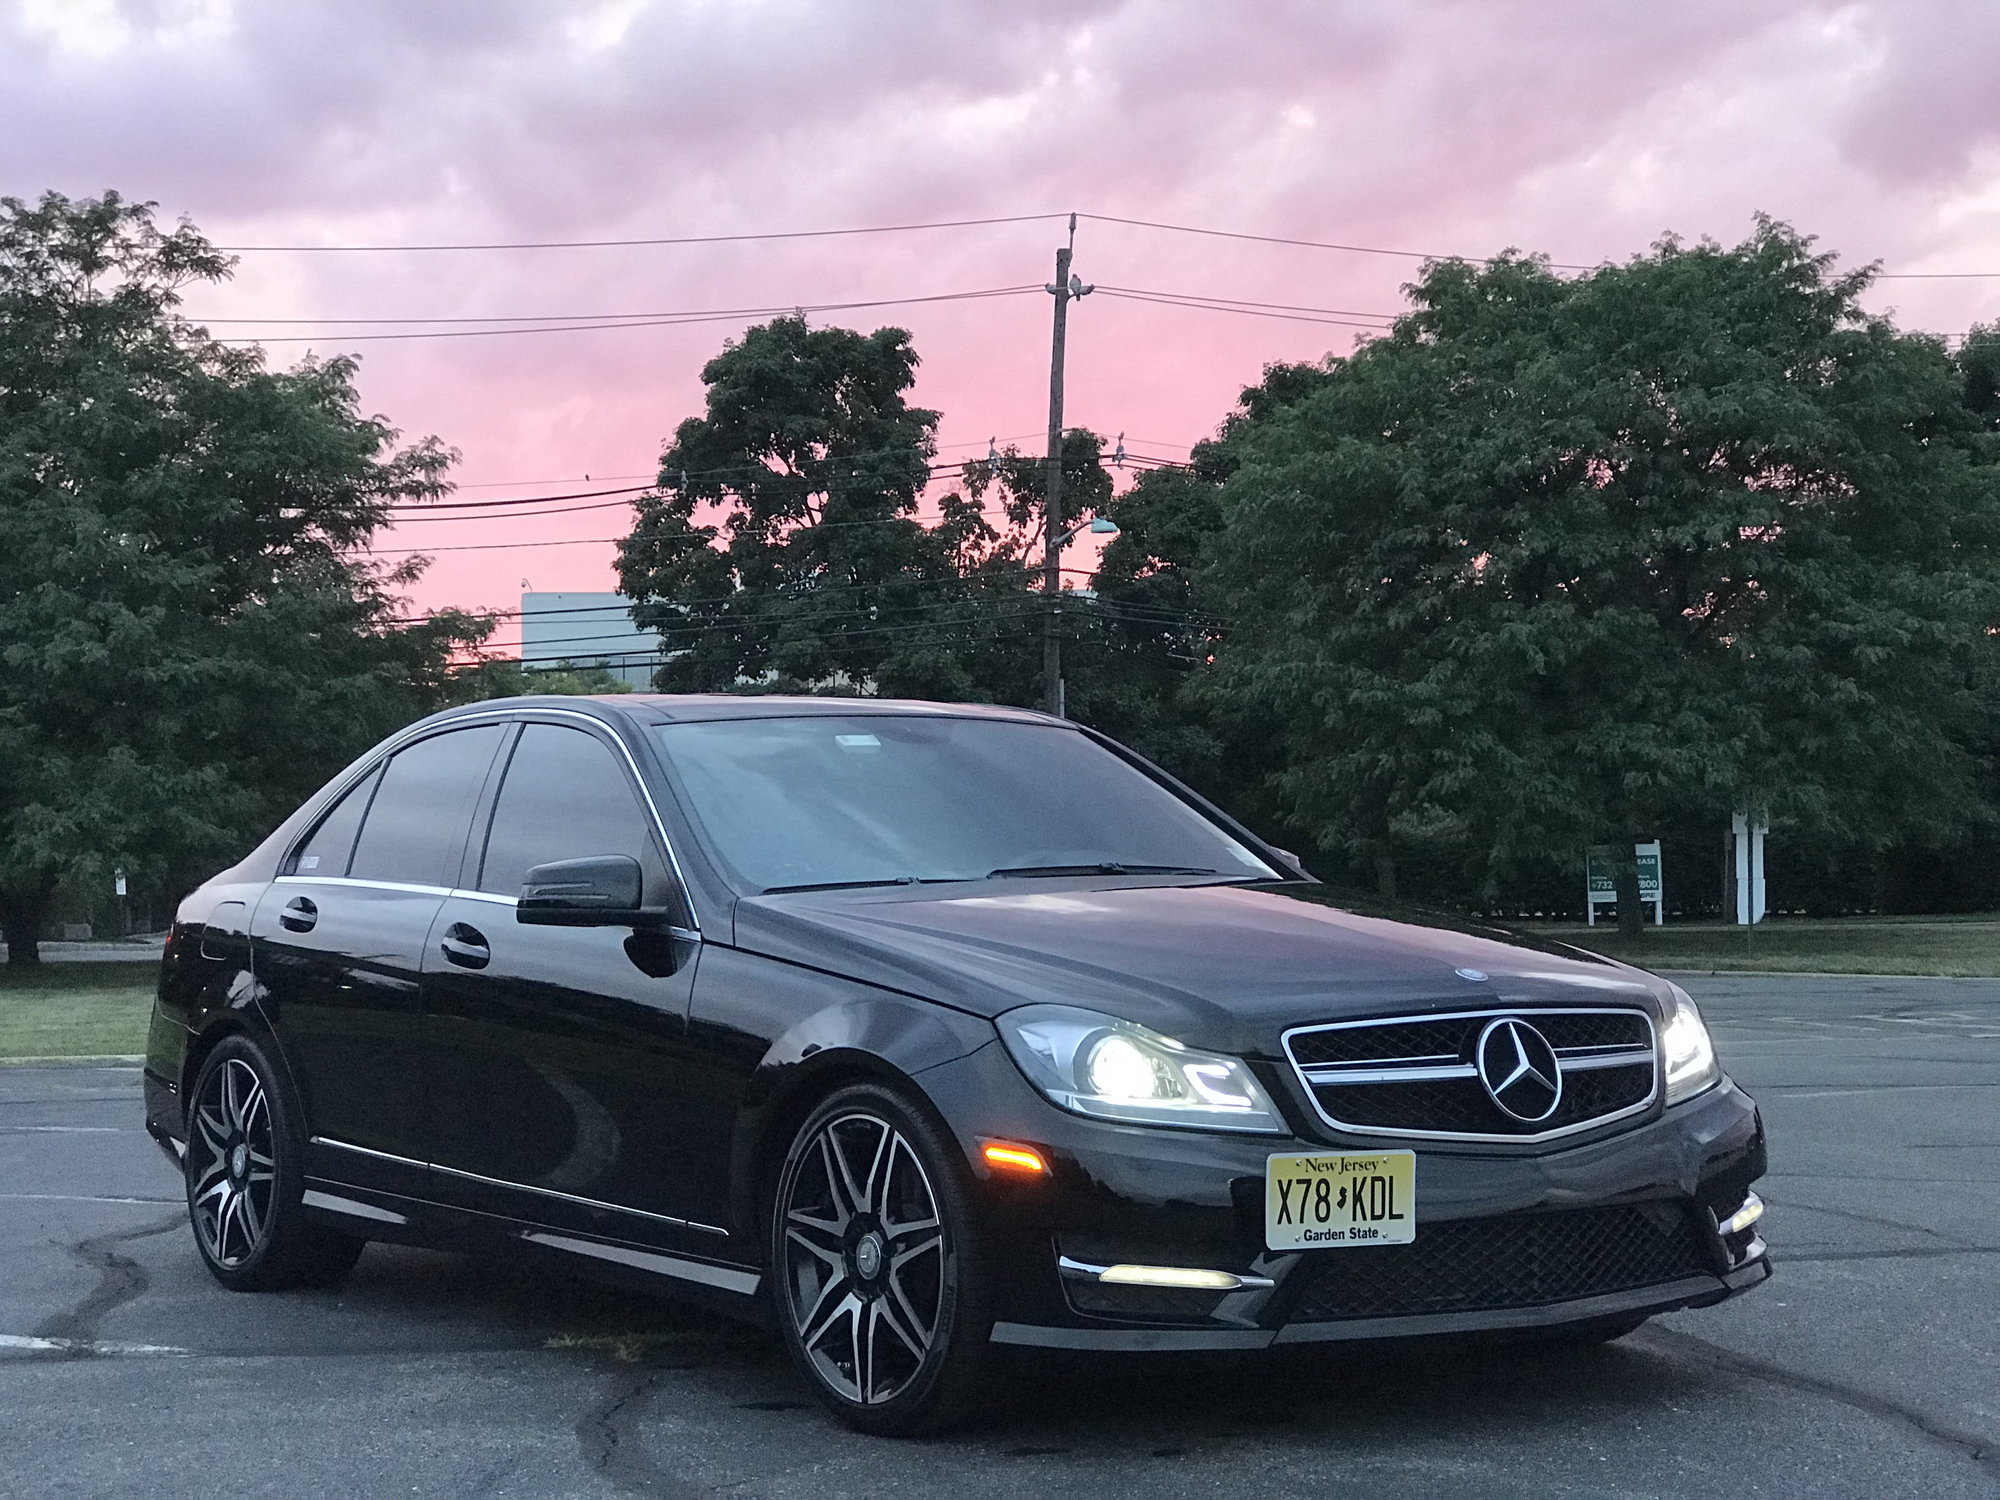 2013 Mercedes-Benz C300 Sport (AMG Appearance Package) For Sale ...